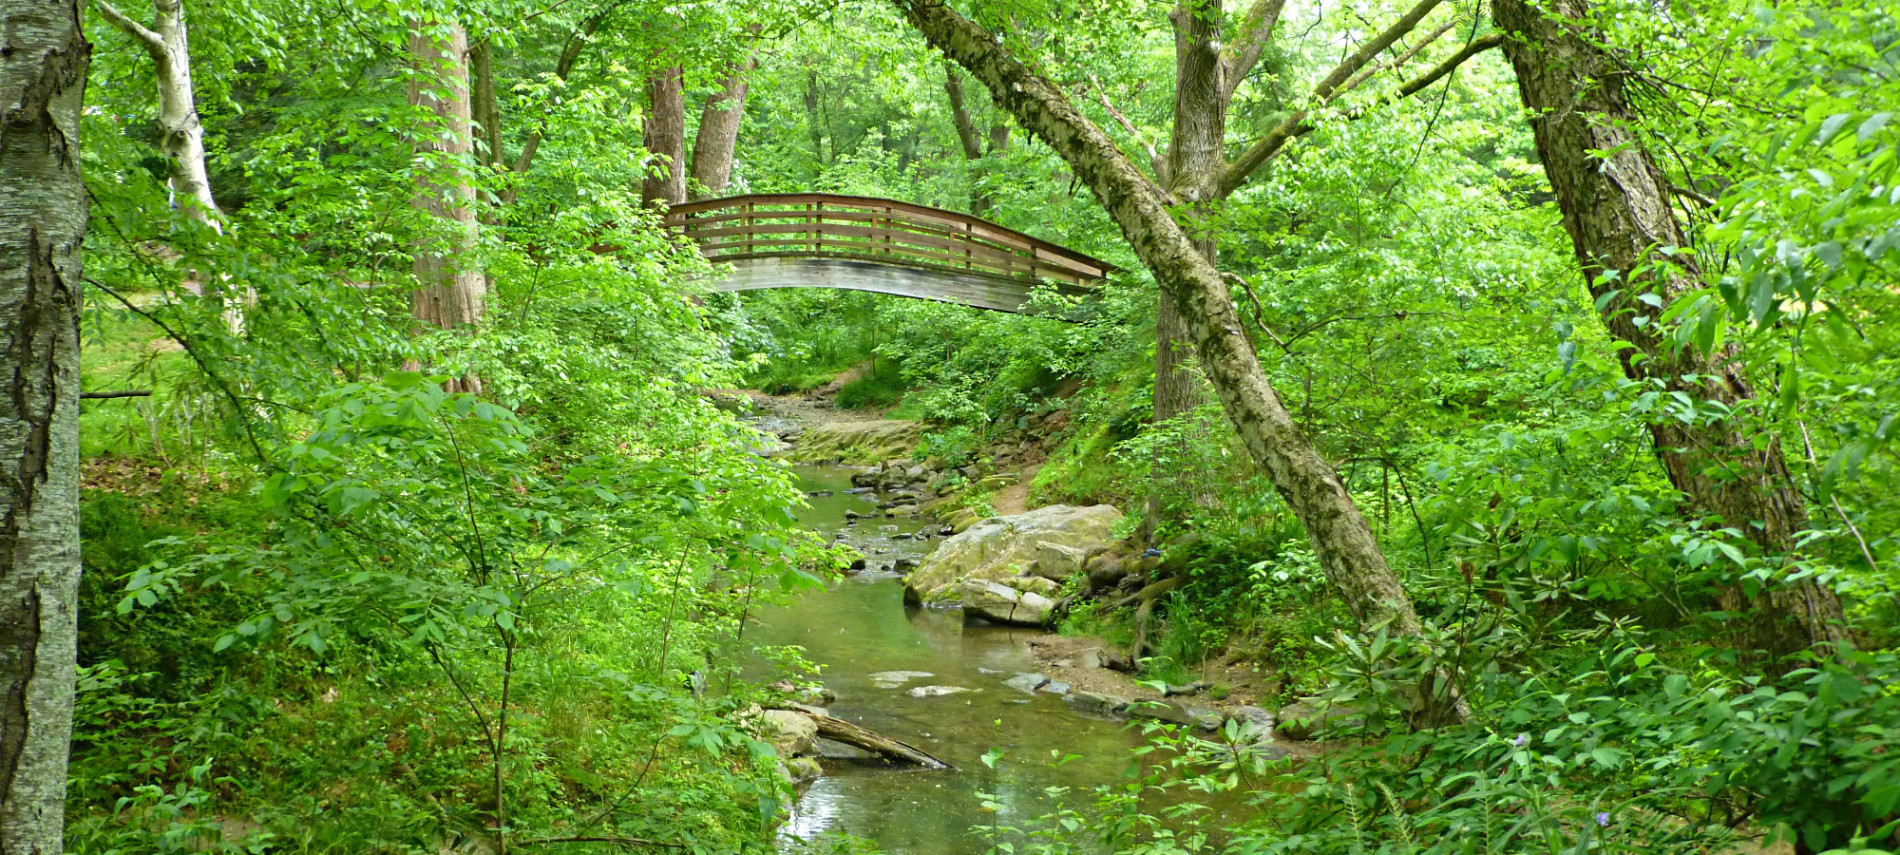 Arched wooden bridge over a stream surrounded by green leafy trees and lush foliage